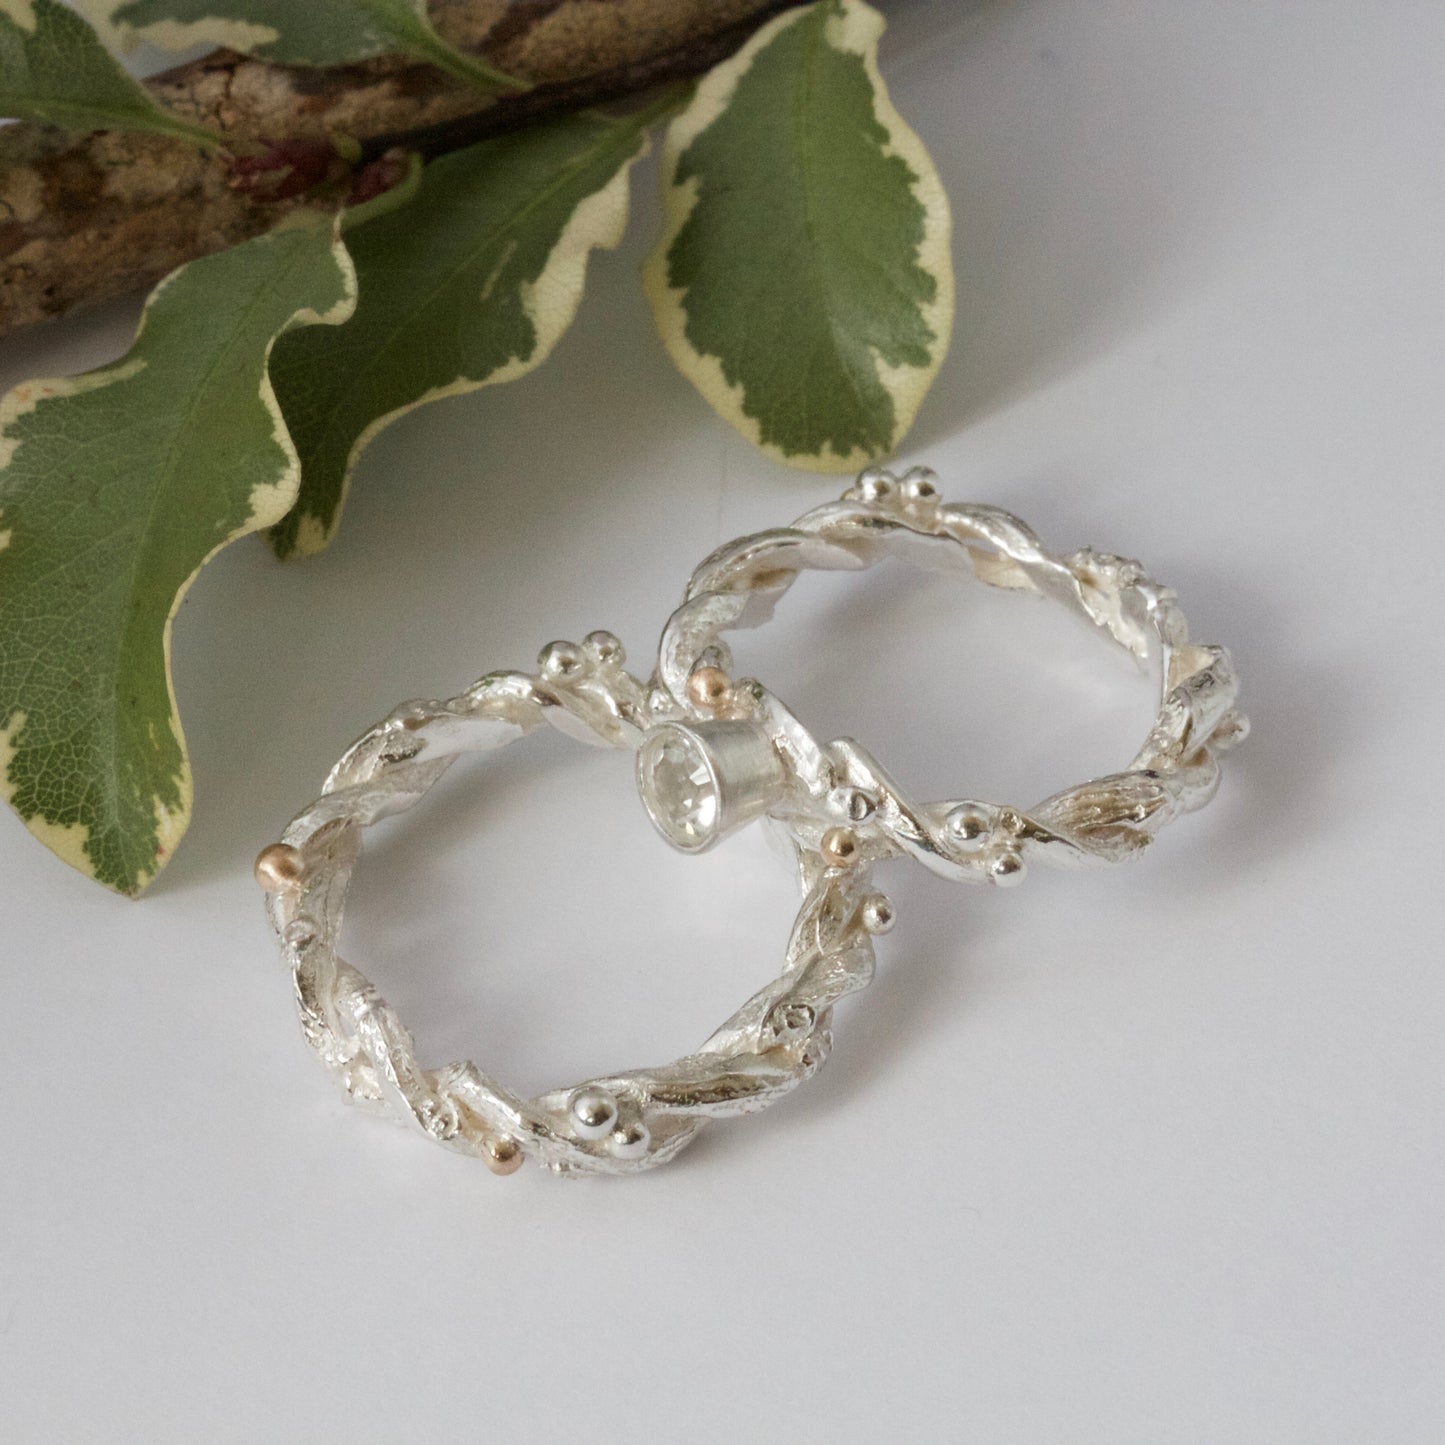 Entwined Forest Twig Ring-Alternative Unique Engagement Ring-branch ring